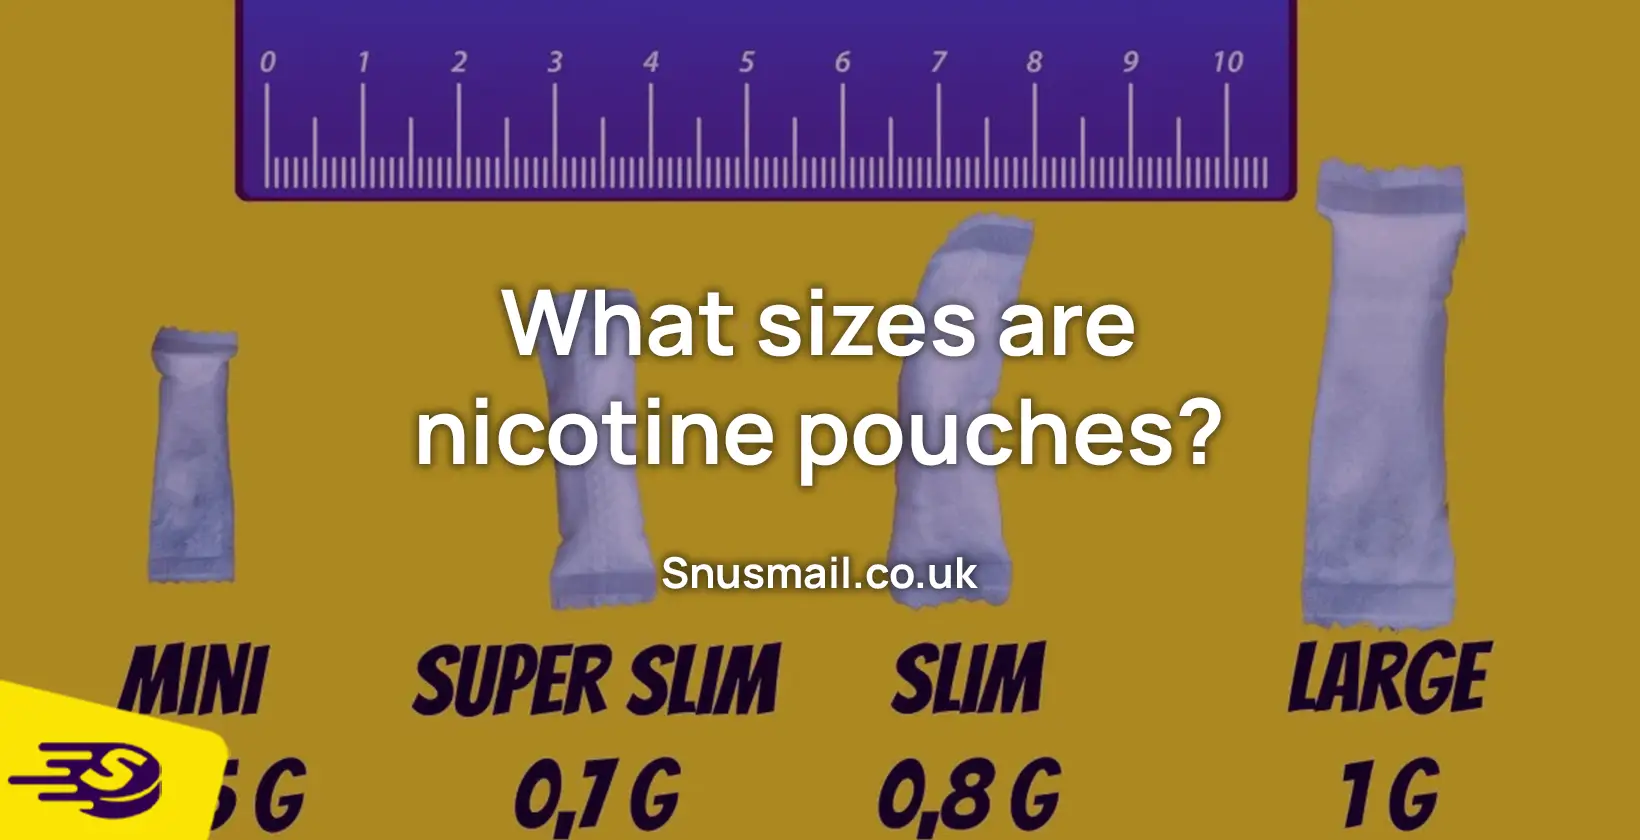 What sizes are nicotine pouches